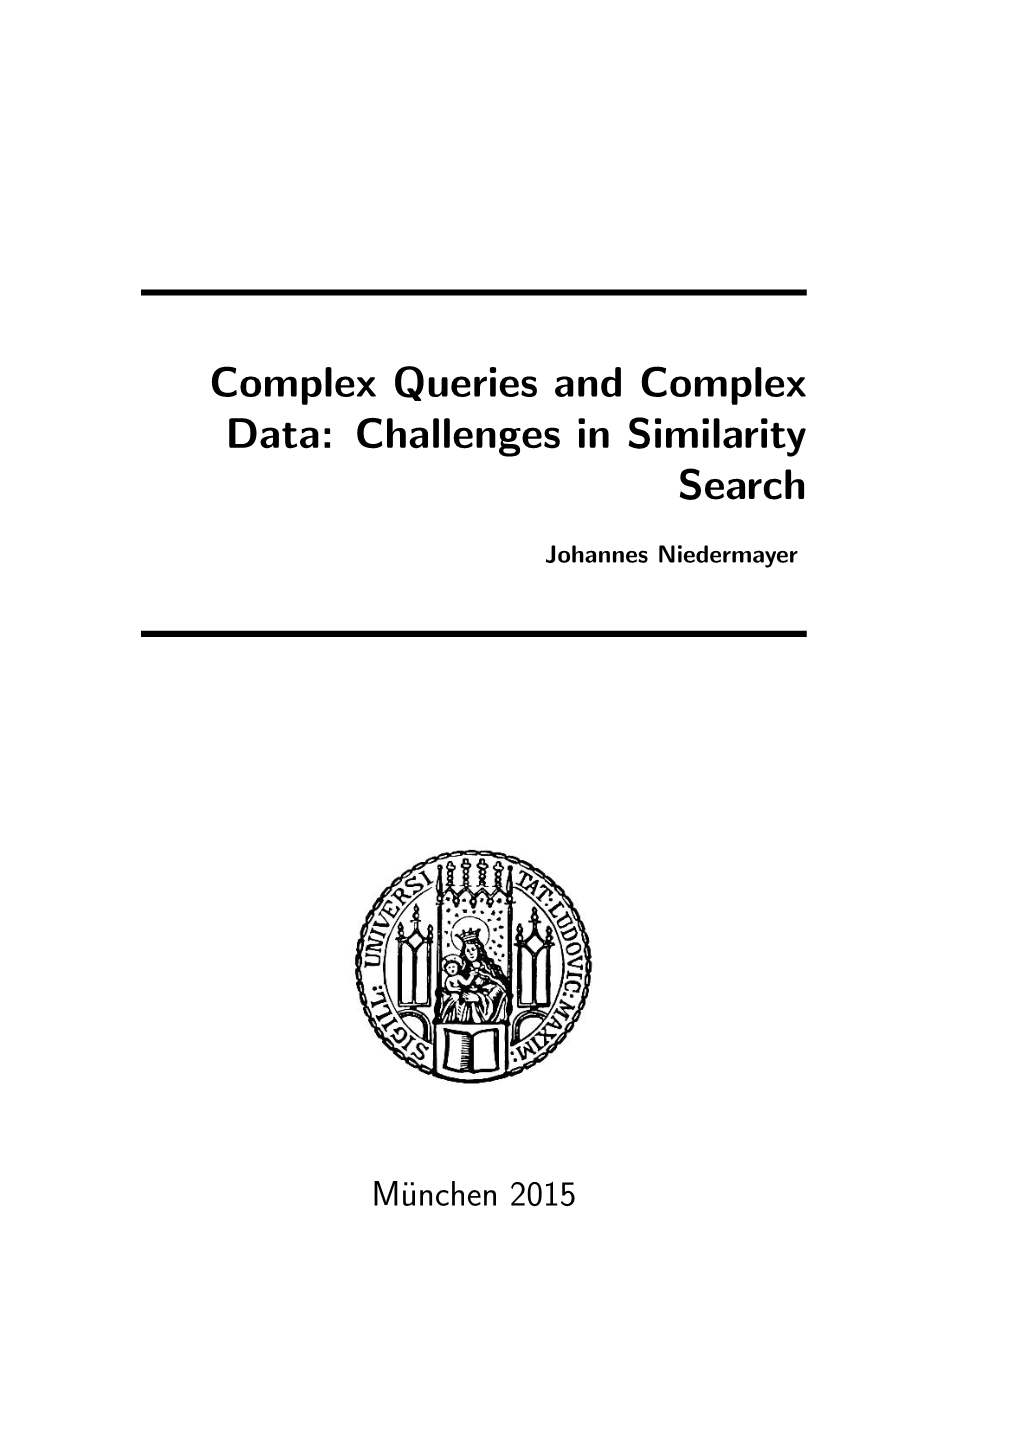 Complex Queries and Complex Data: Challenges in Similarity Search